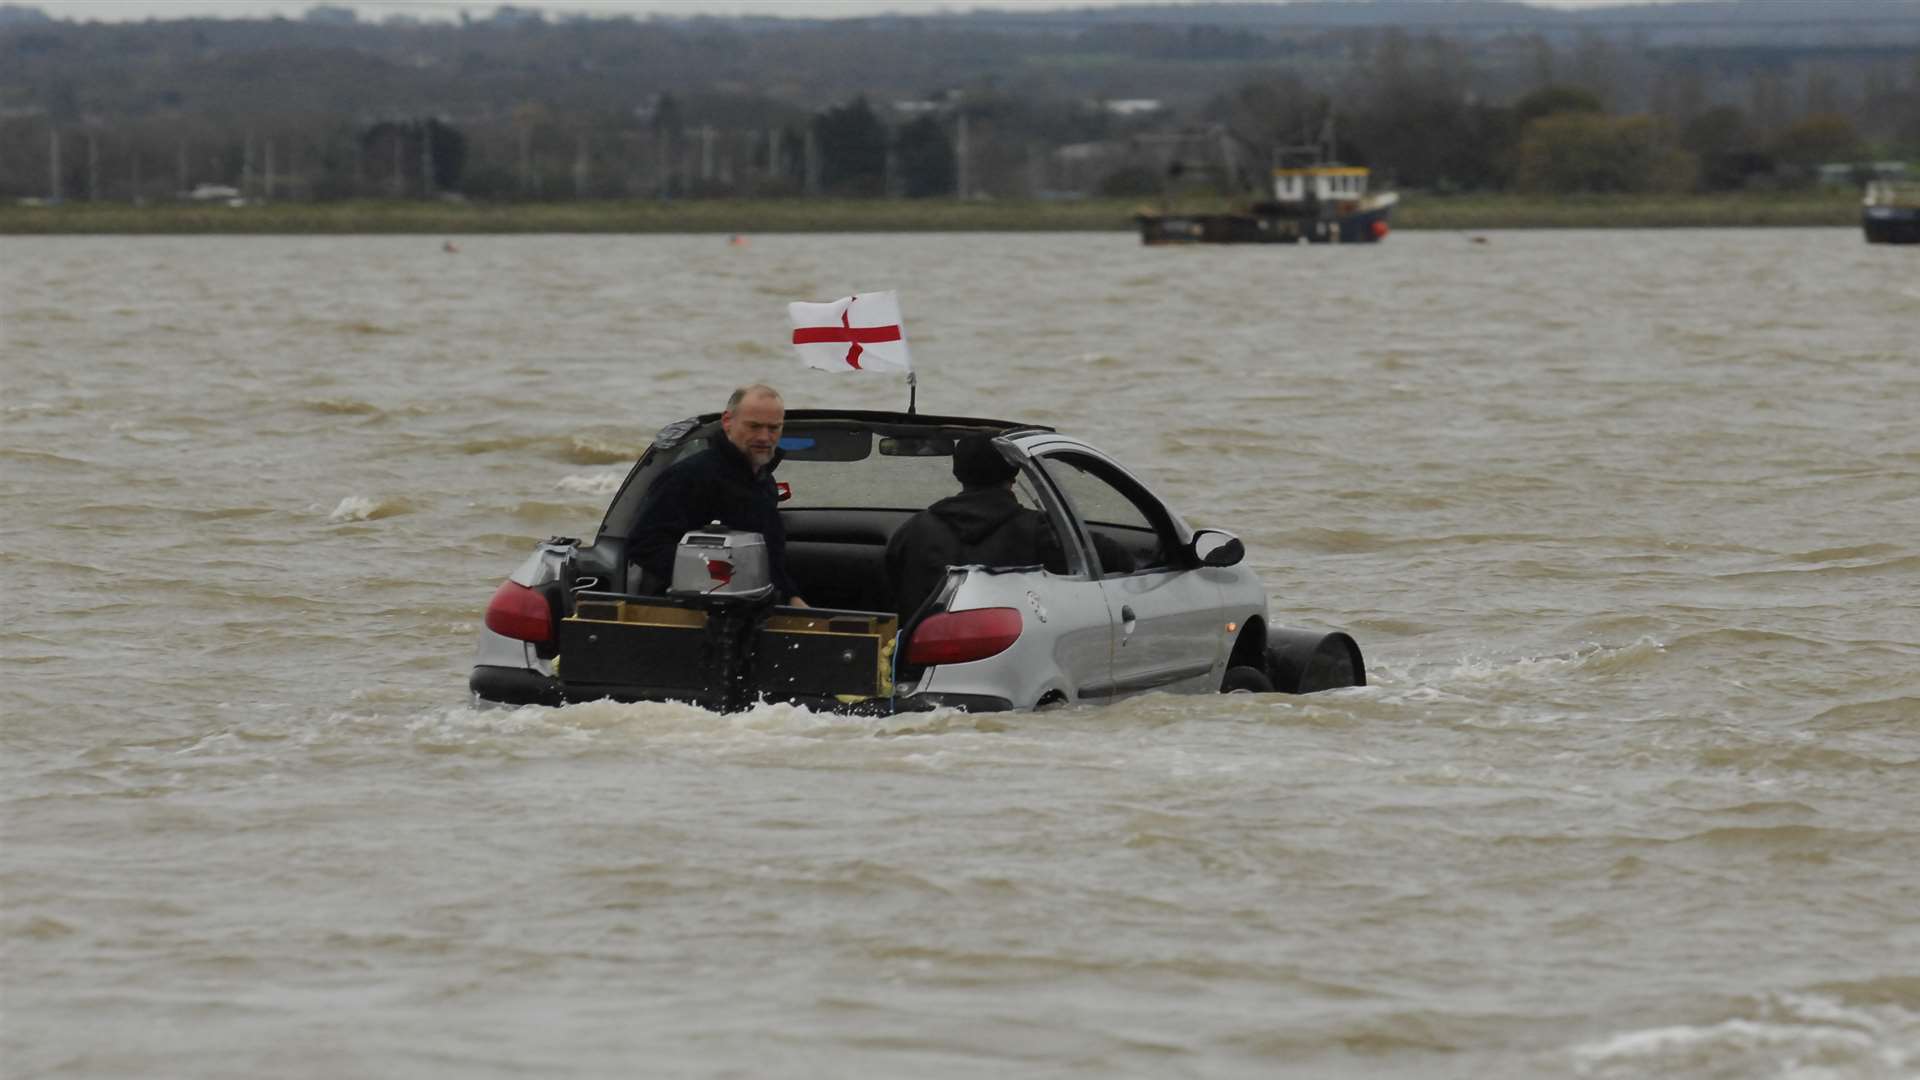 The floating car heading out across the Swale